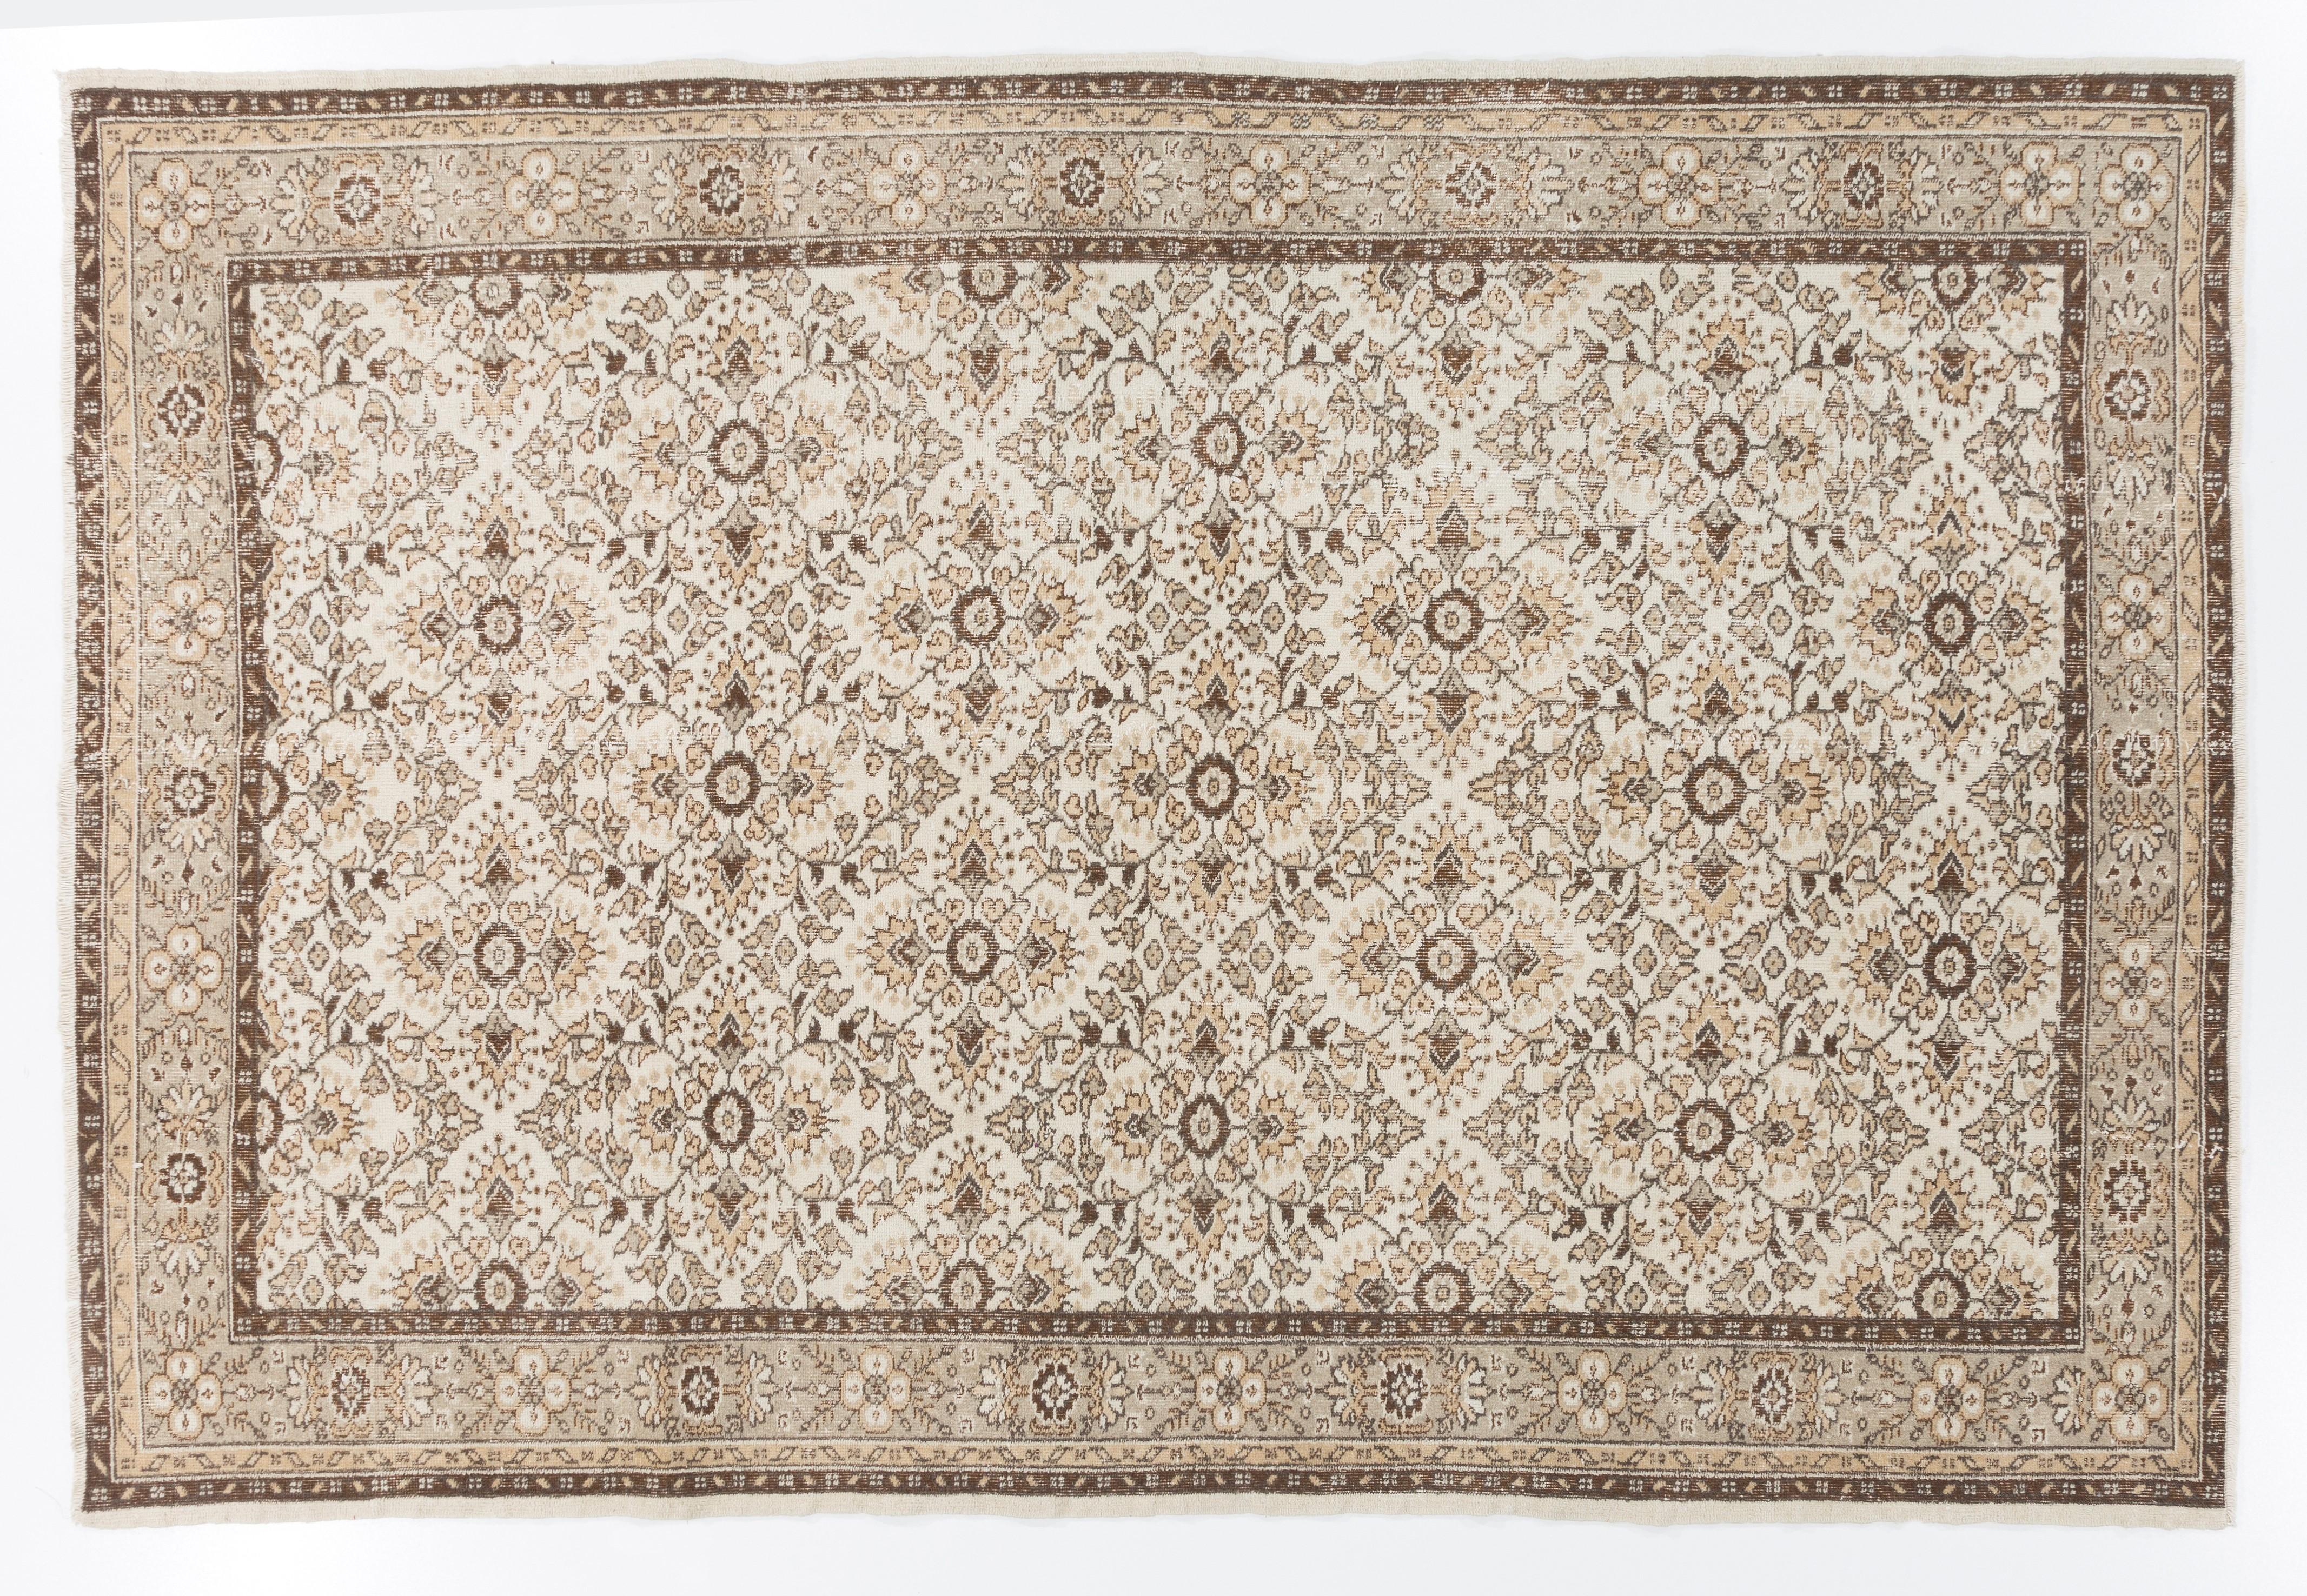 This vintage hand knotted Turkish area rug was made in the 1960s. It has low wool pile on cotton foundation. It is sturdy, in good condition and clean. It features an all-over design of latticed stylized floral heads in quatrefoil format. The color